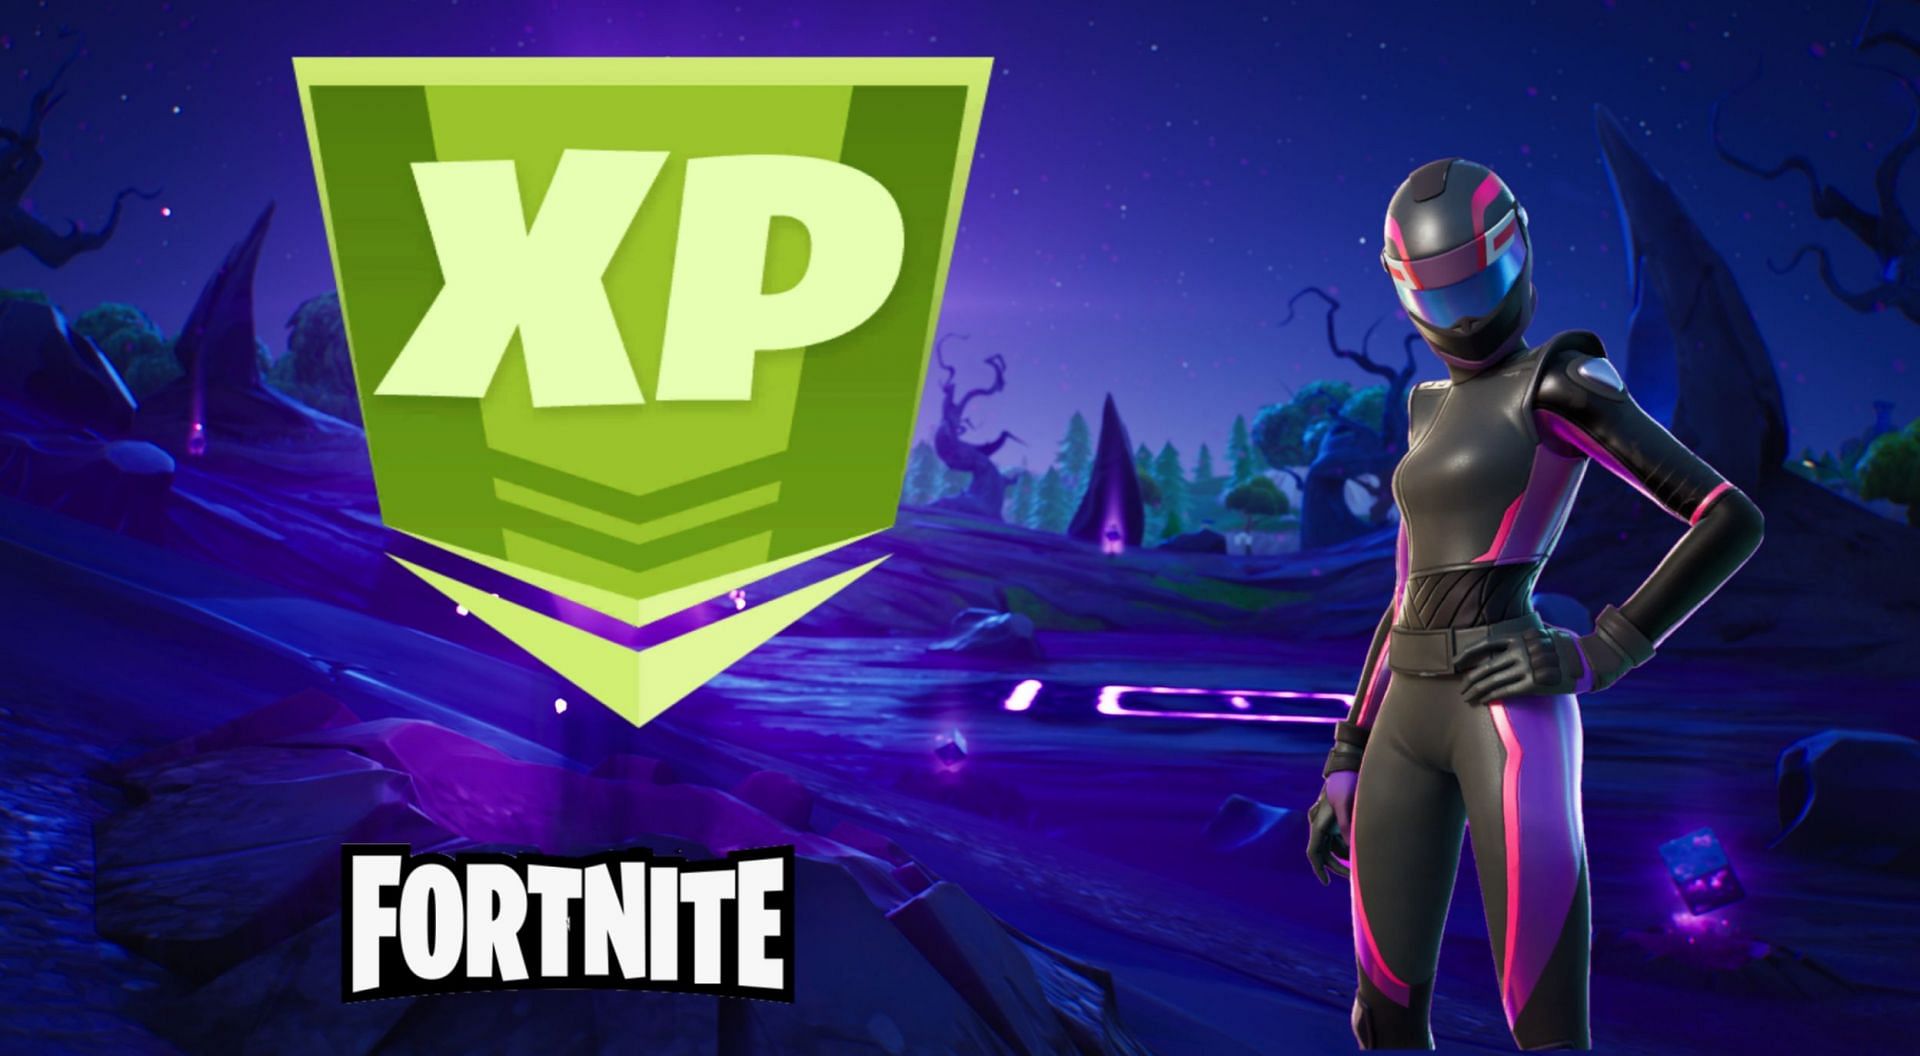 Gamers can earn up to 300,000 XP in a match in Fortnite Chapter 2 Season 8 (Image via Sportskeeda)